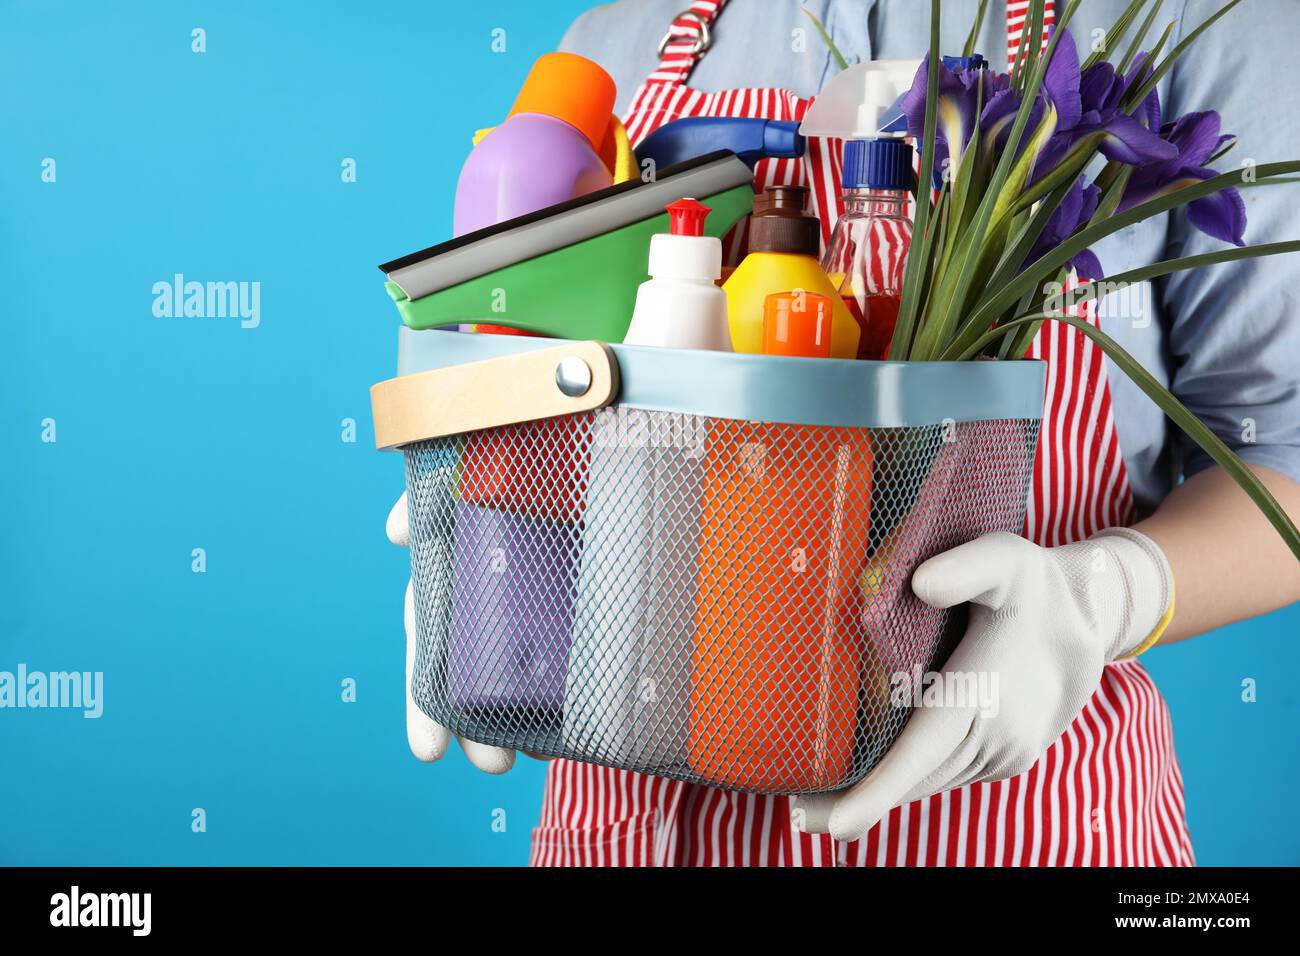 Woman holding basket with spring flowers and cleaning supplies on light blue background, closeup Stock Photo